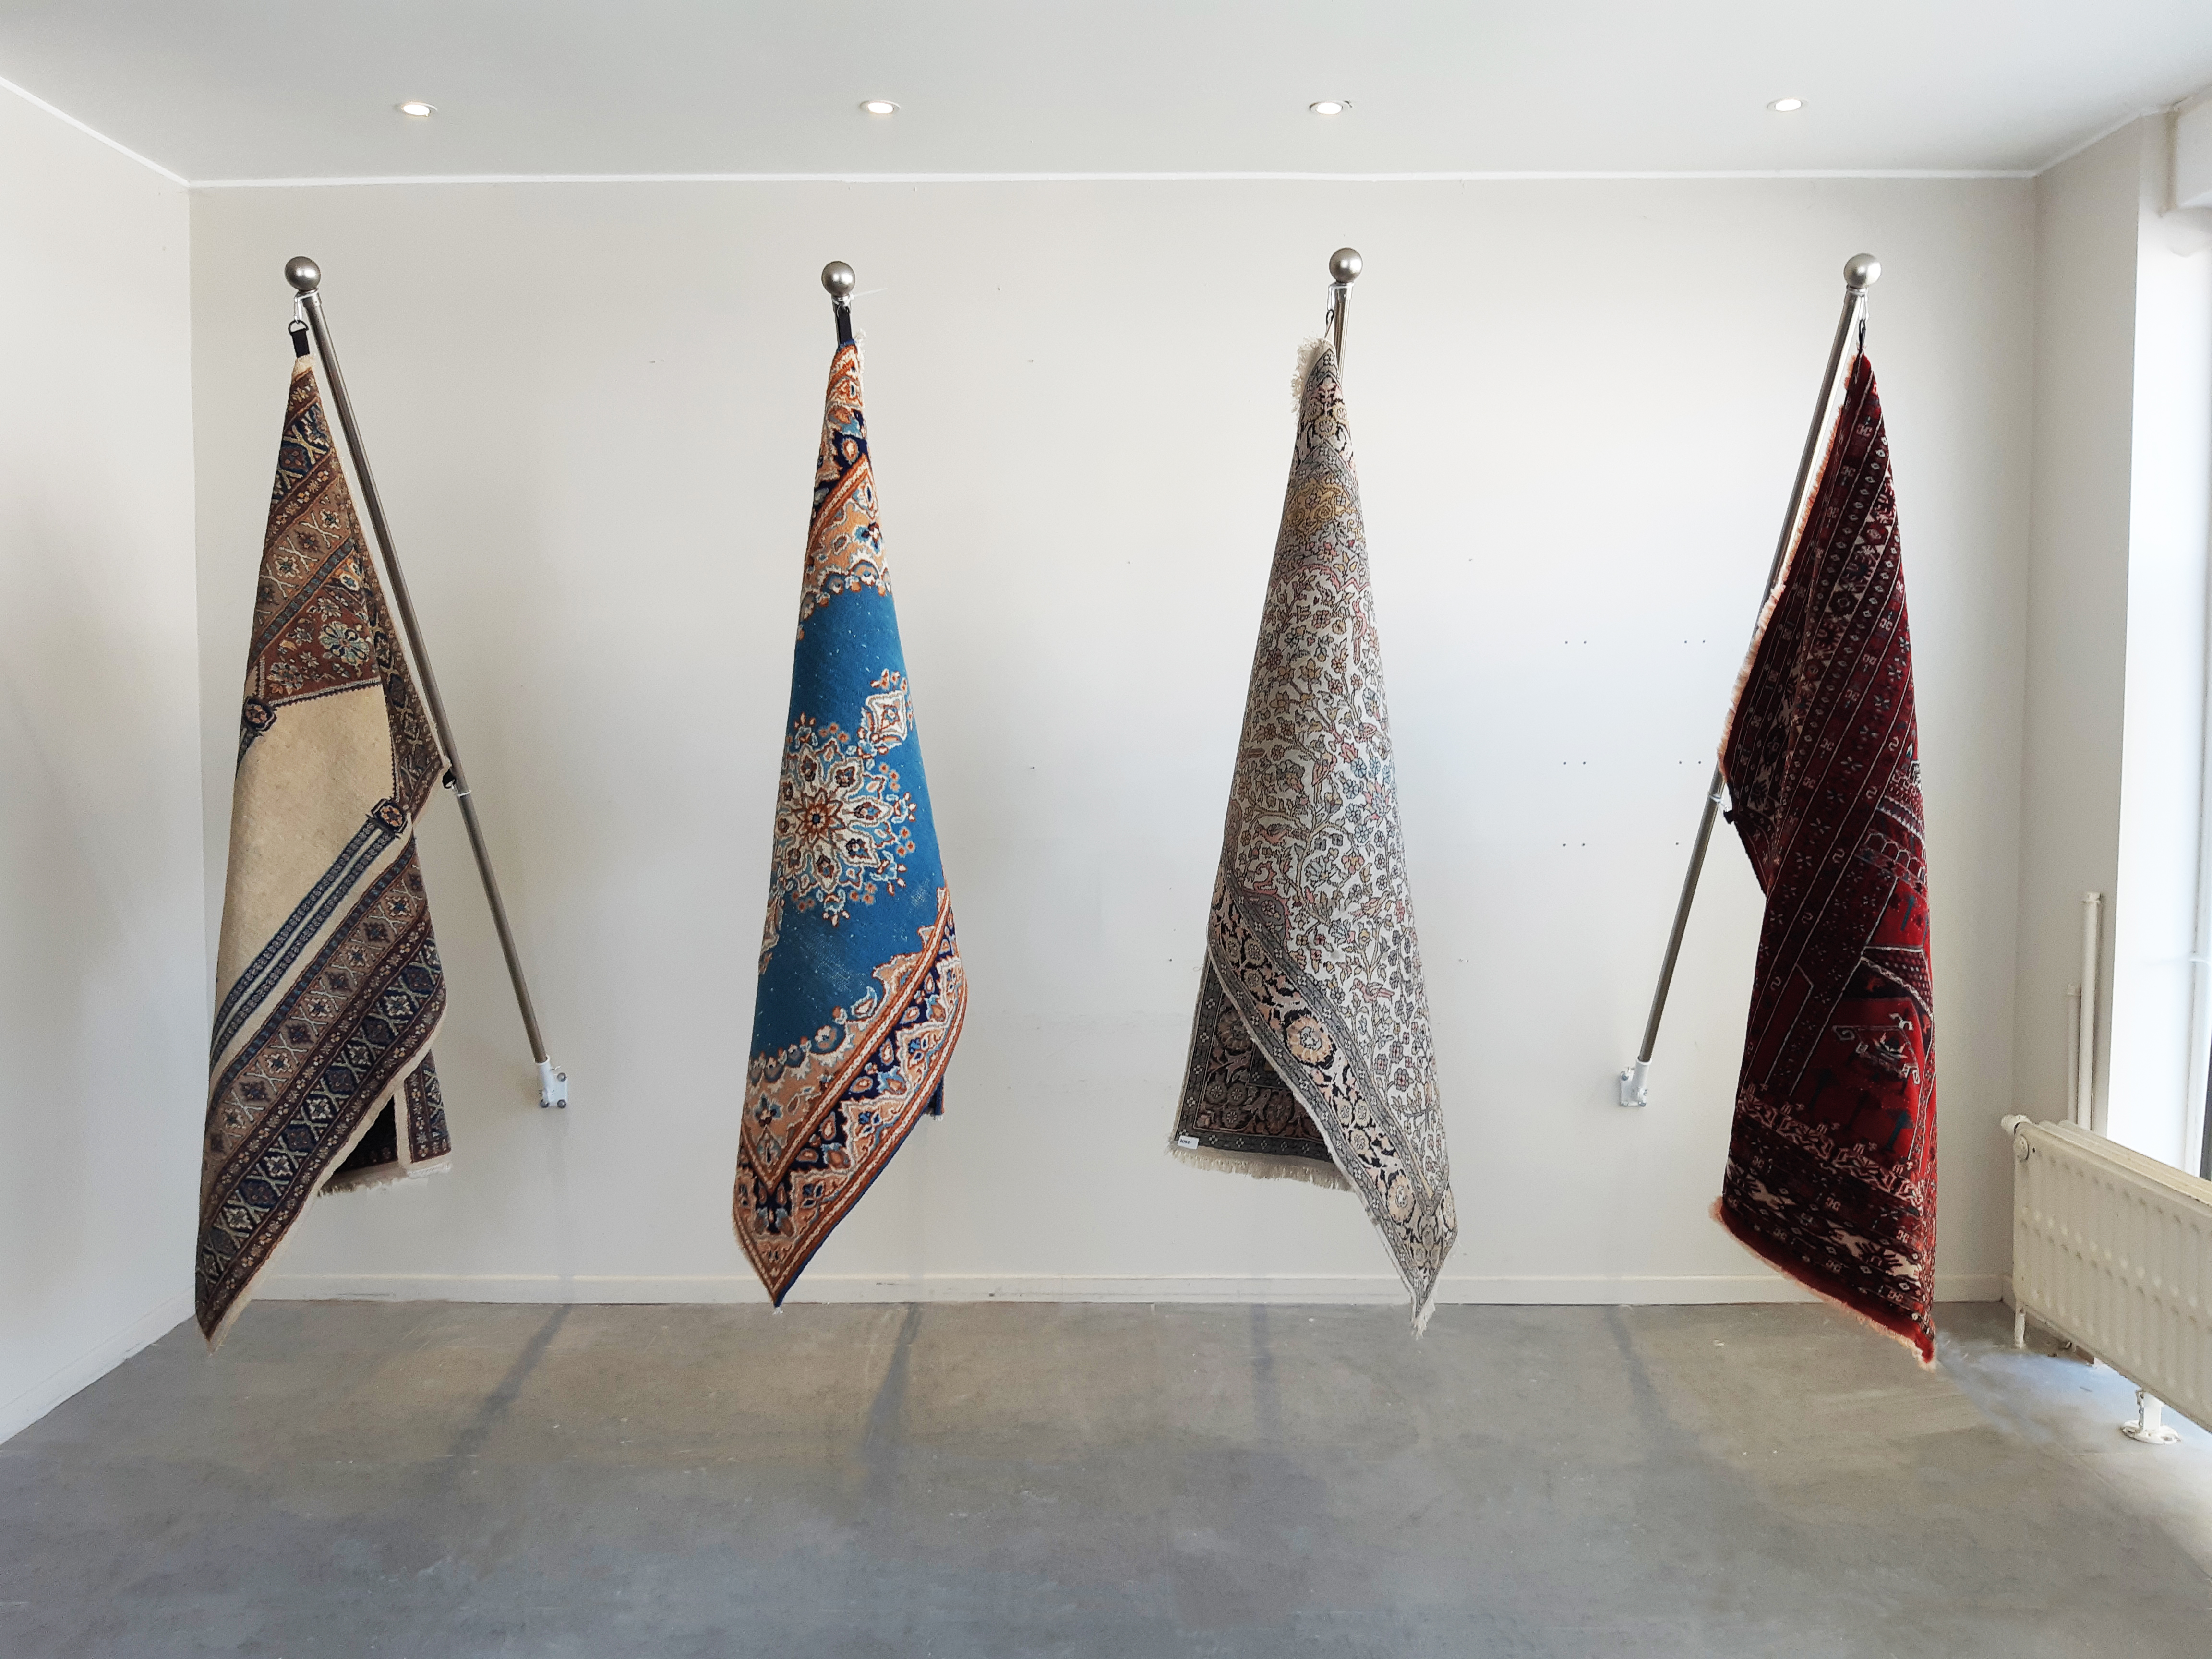 Sofhie Mavroudis - Flags belong to the people - installation